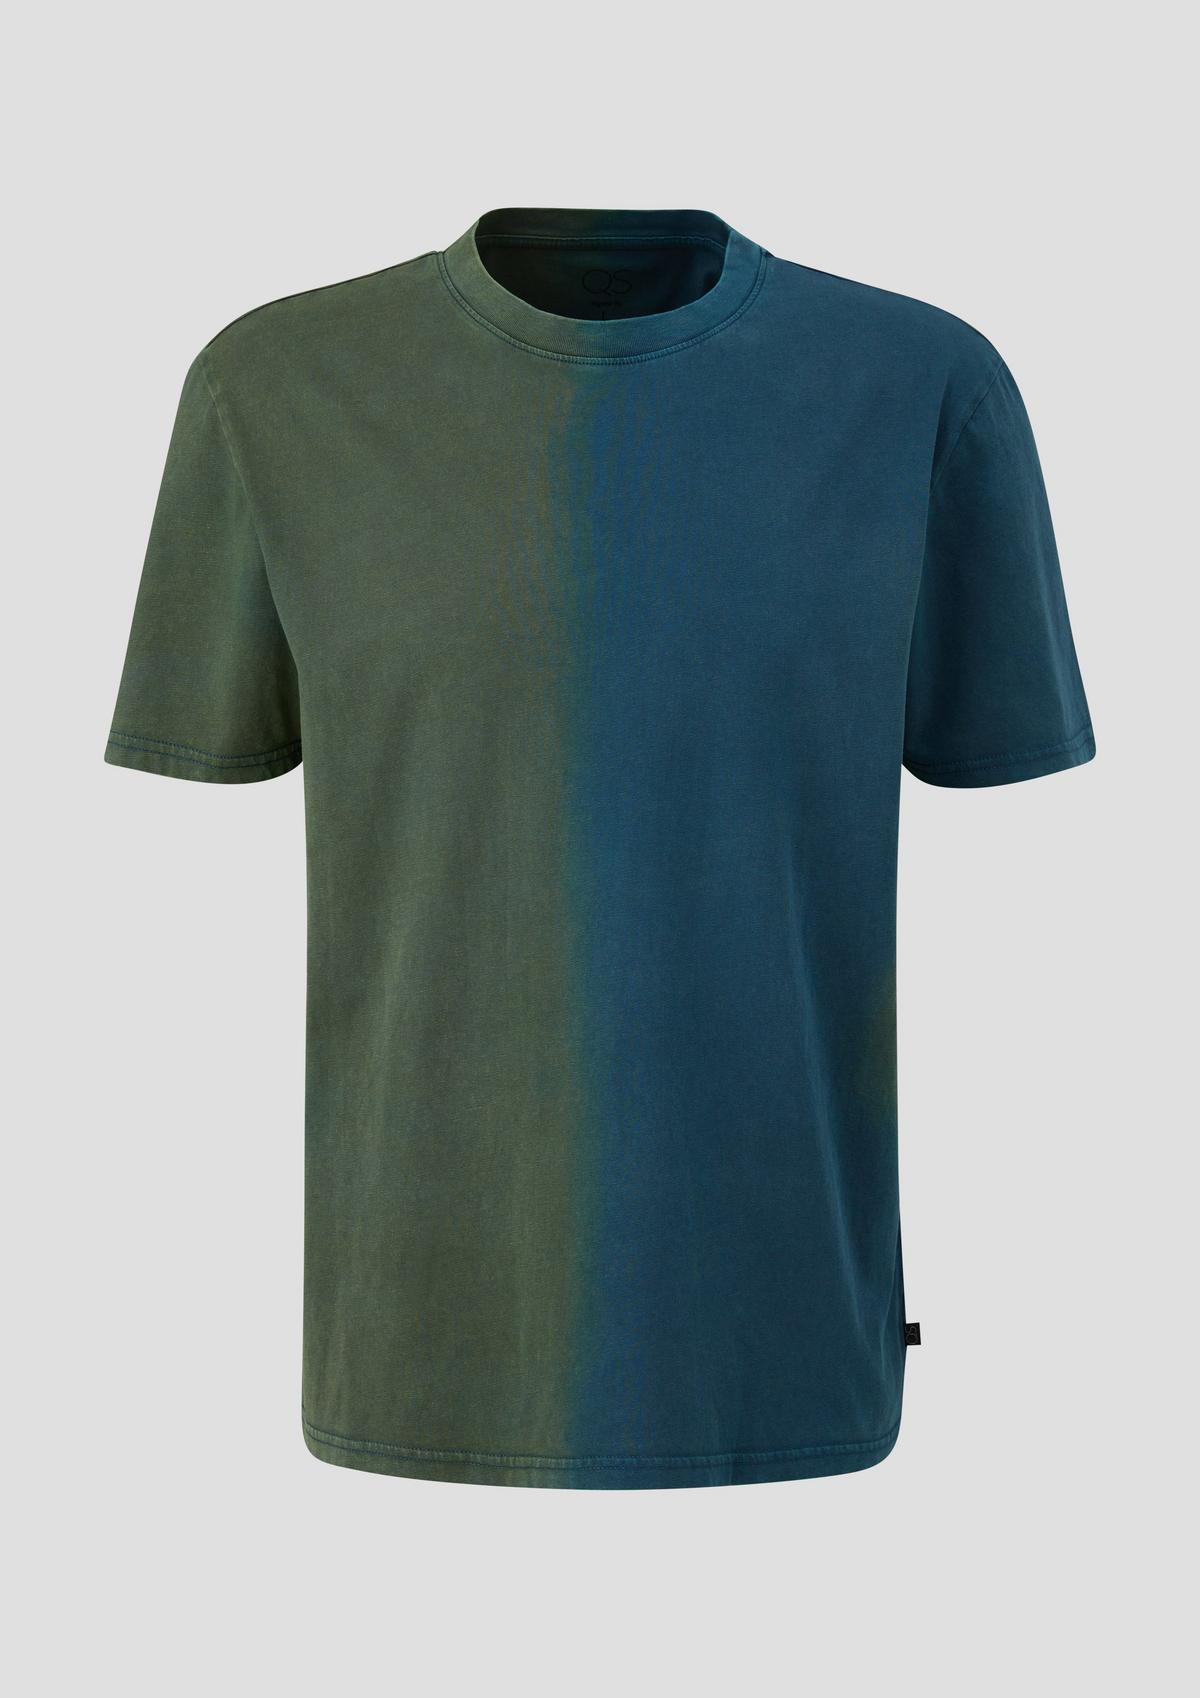 s.Oliver T-shirt with a garment wash